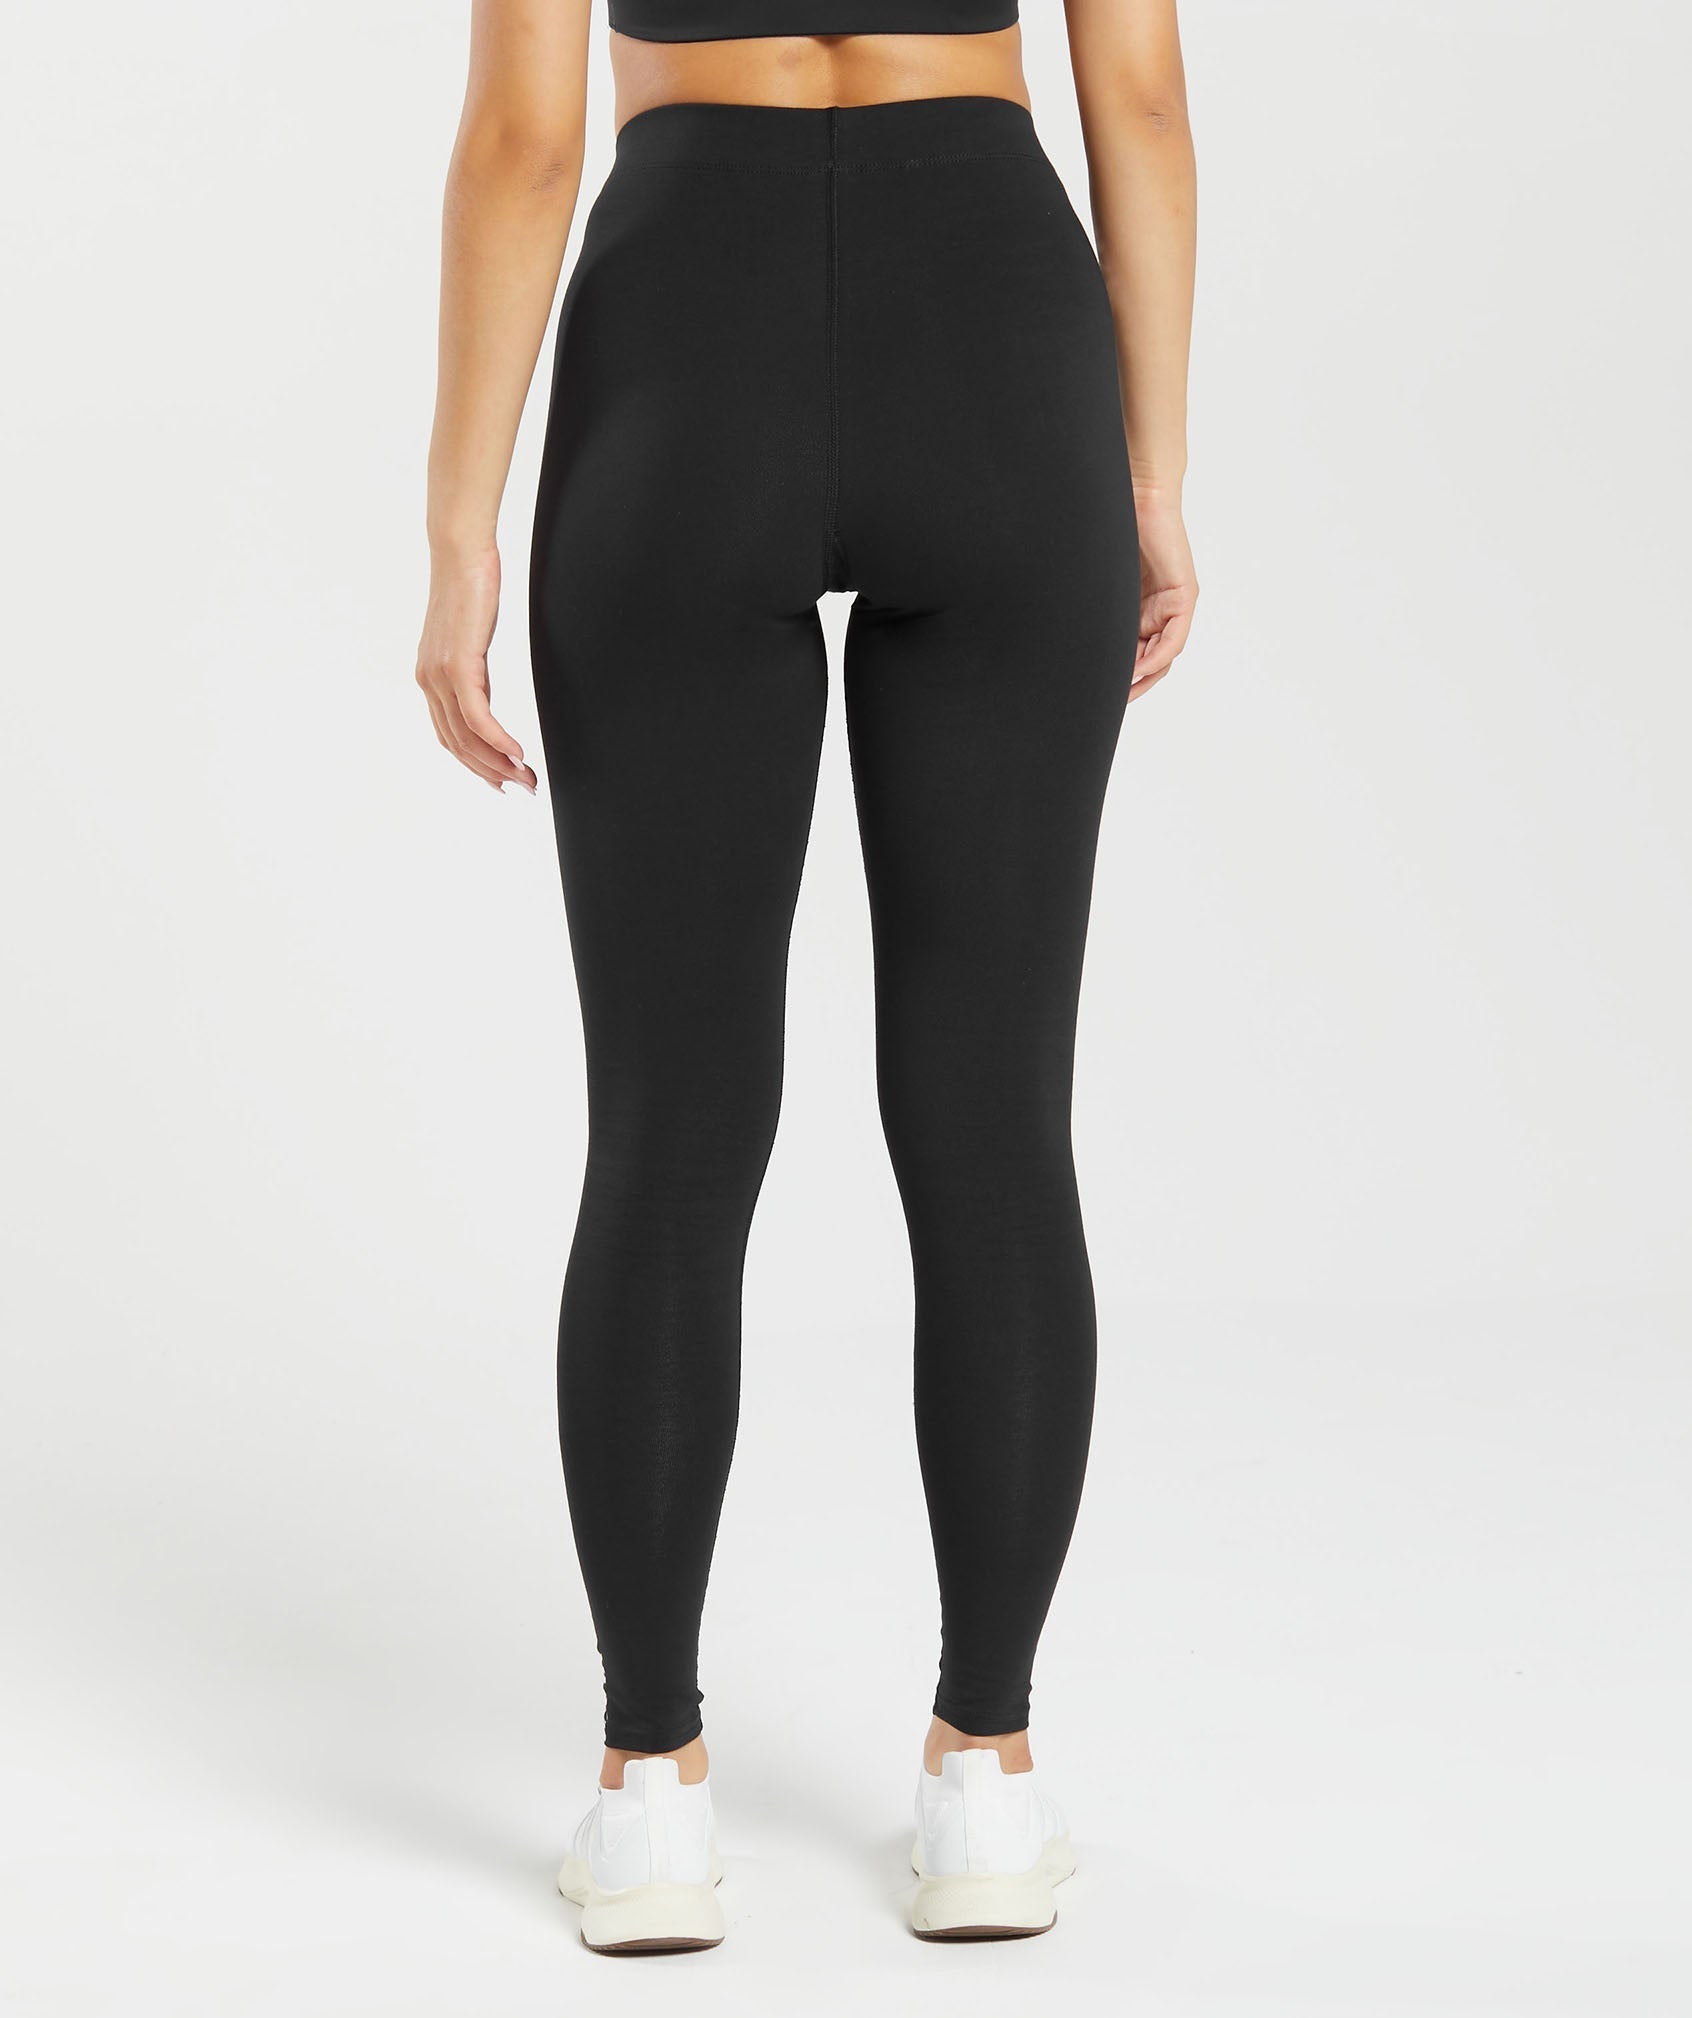 Gymshark Black Training Graphic Leggings Size XS - $35 (22% Off Retail) -  From Christie